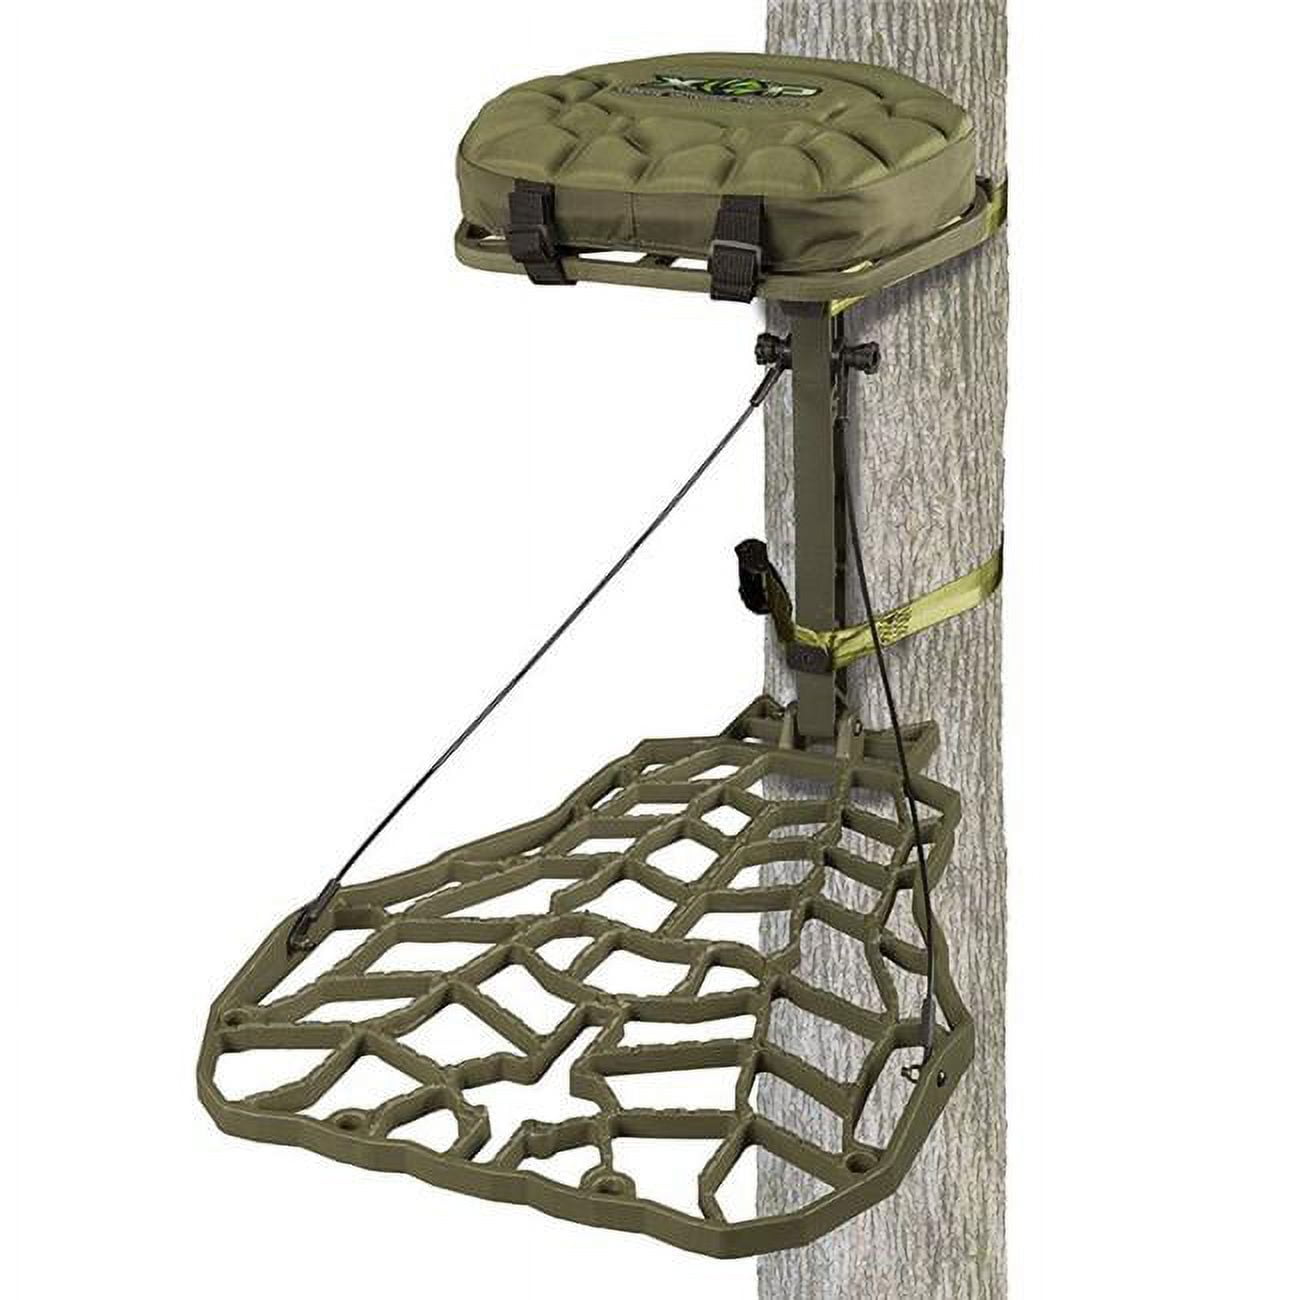 XOP-XTREME OUTDOOR PRODUCTS Deluxe Hang On Treestand Seat Cushion